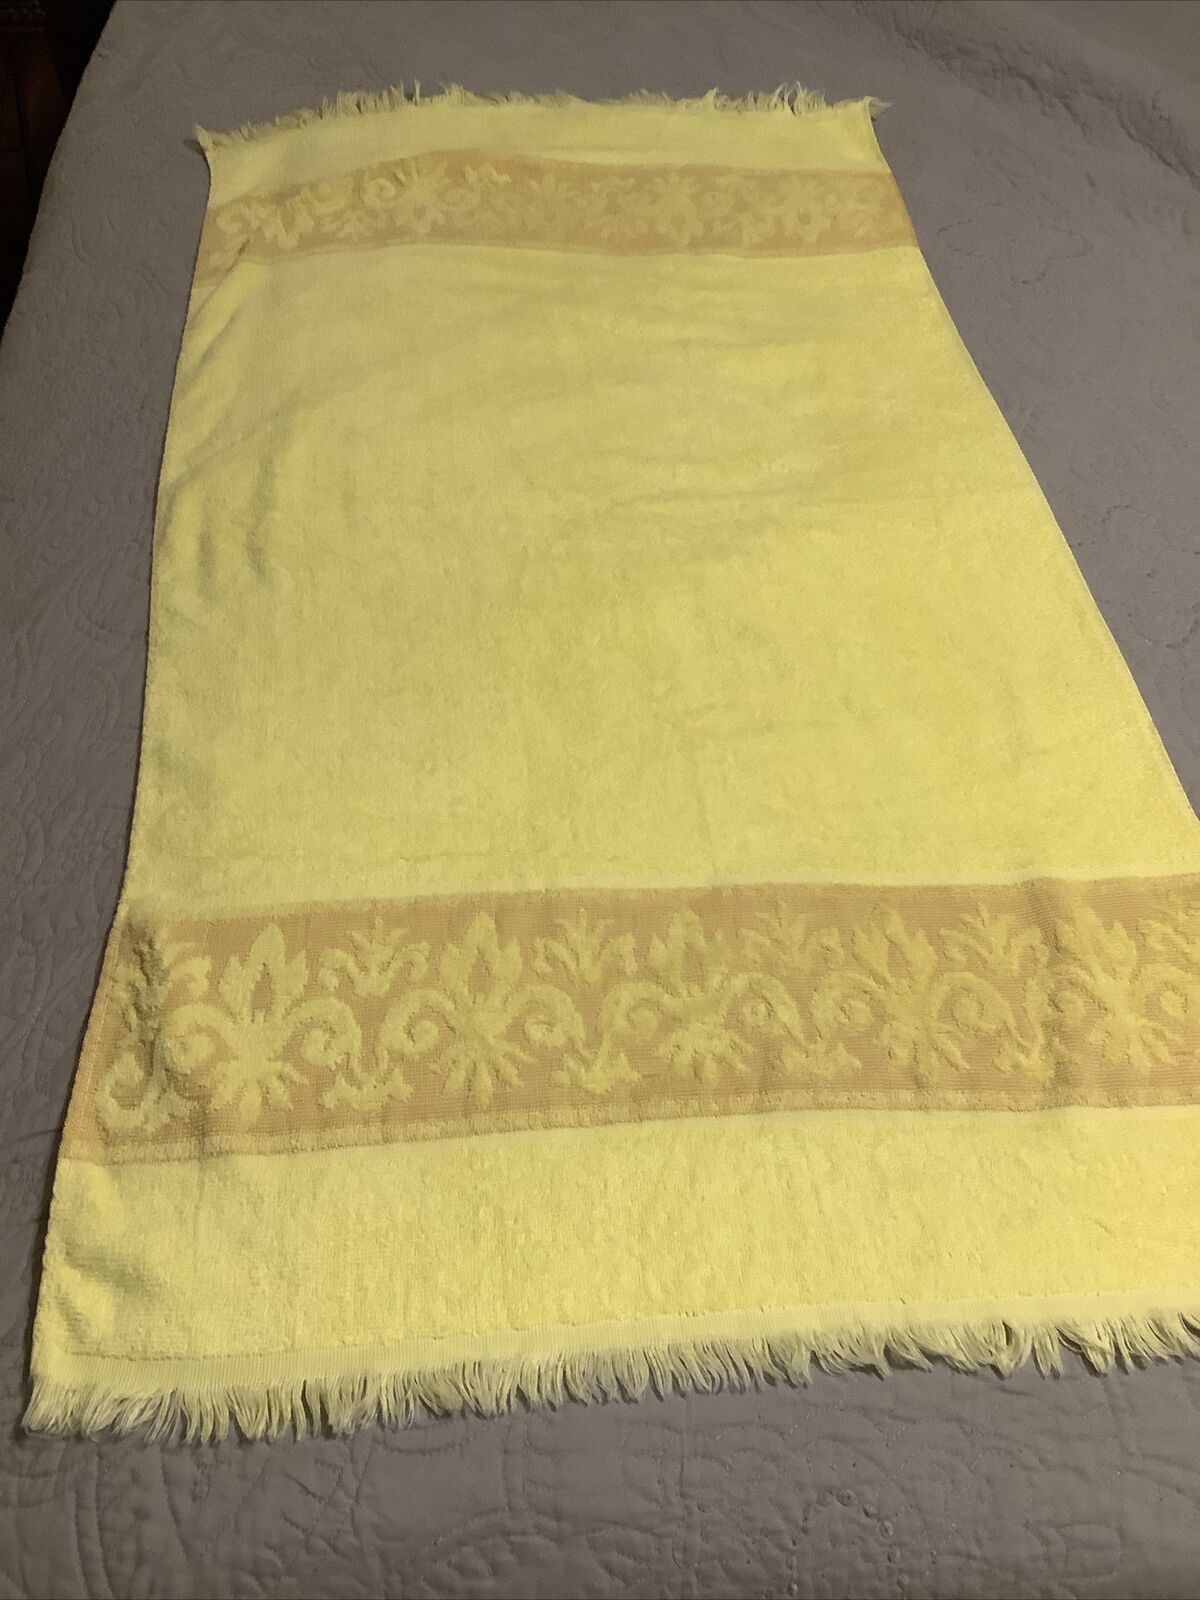 VINTAGE Sears Bath TOWEL BRIGHT YELLOW GOLD MOD Groovy Textured Fringe Matchmate